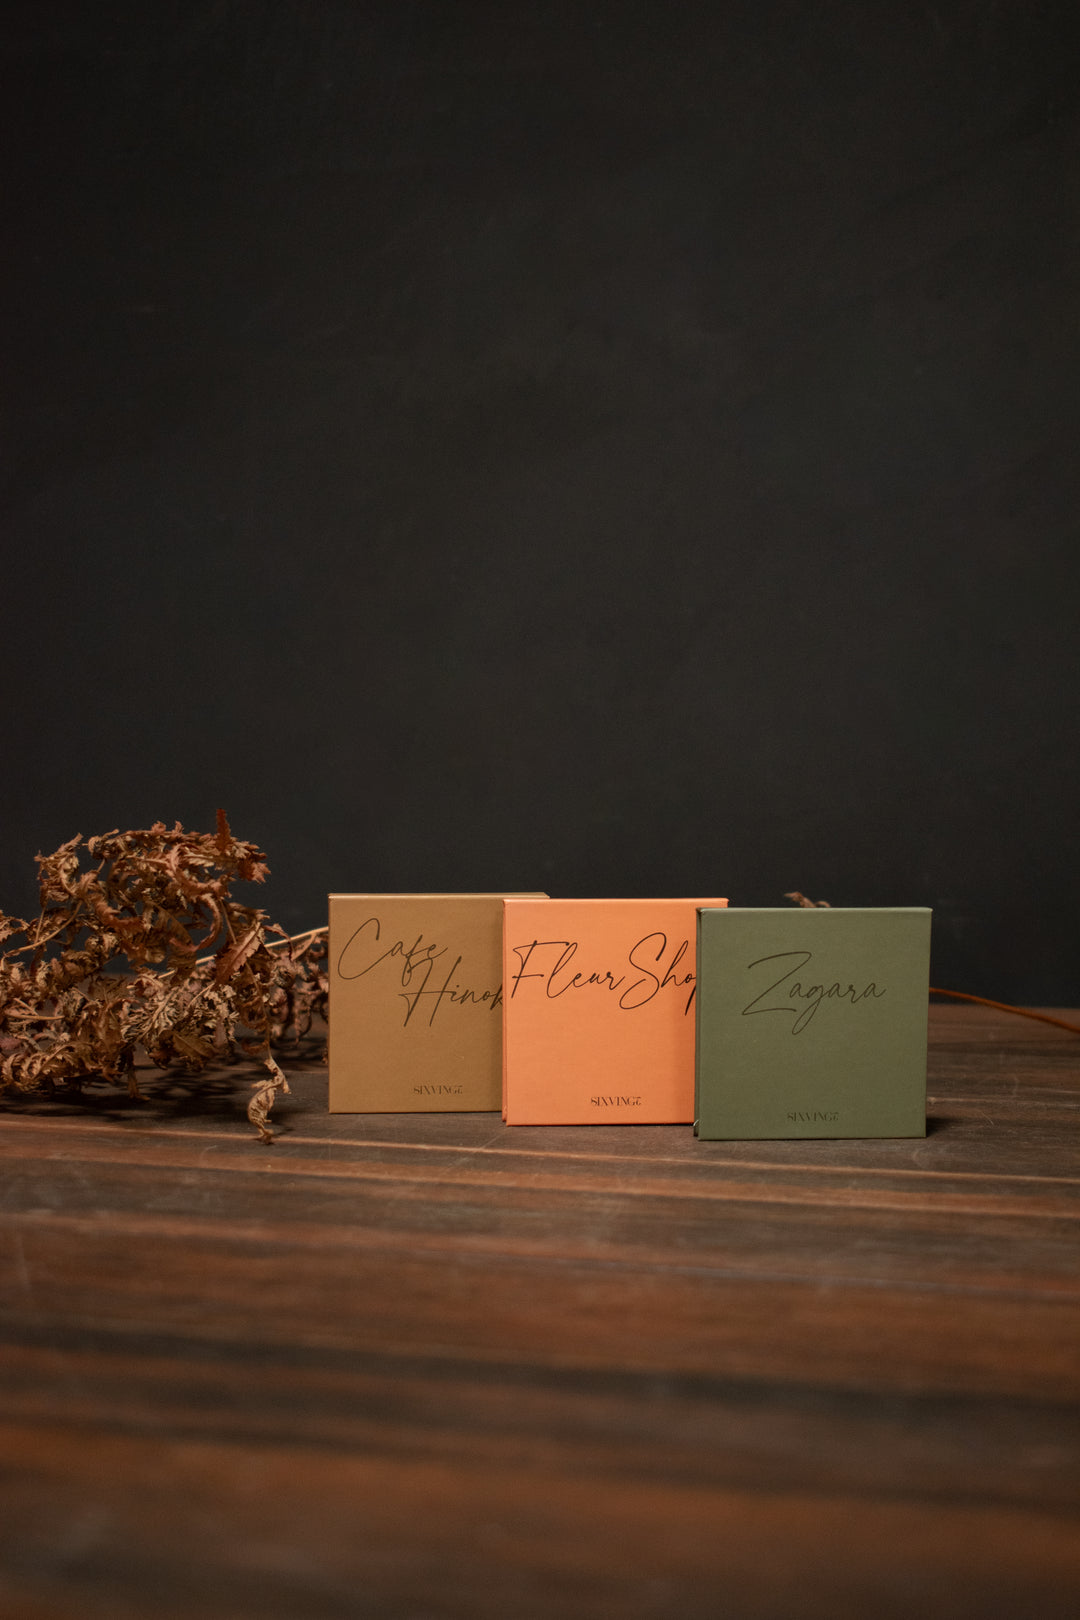 Sixvignt Solid Perfume cases are lined up on a wooden table in front of a dark background